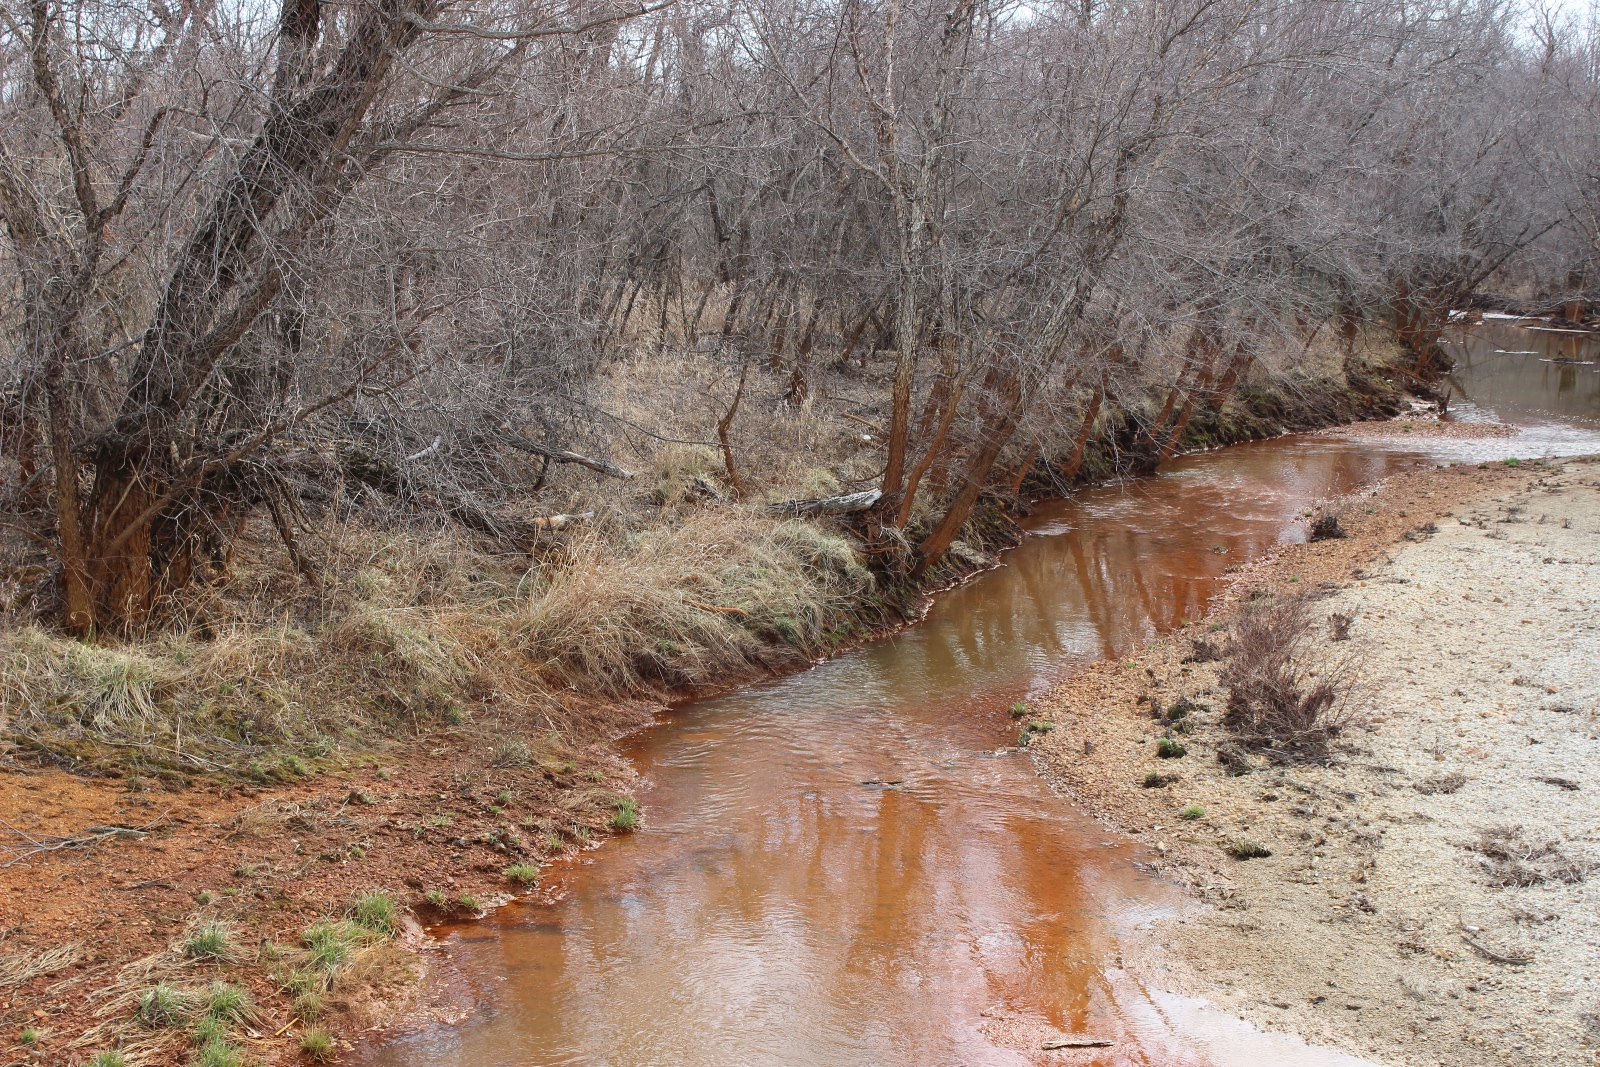 Cooper-colored creek runs through a dry winter forest landscape